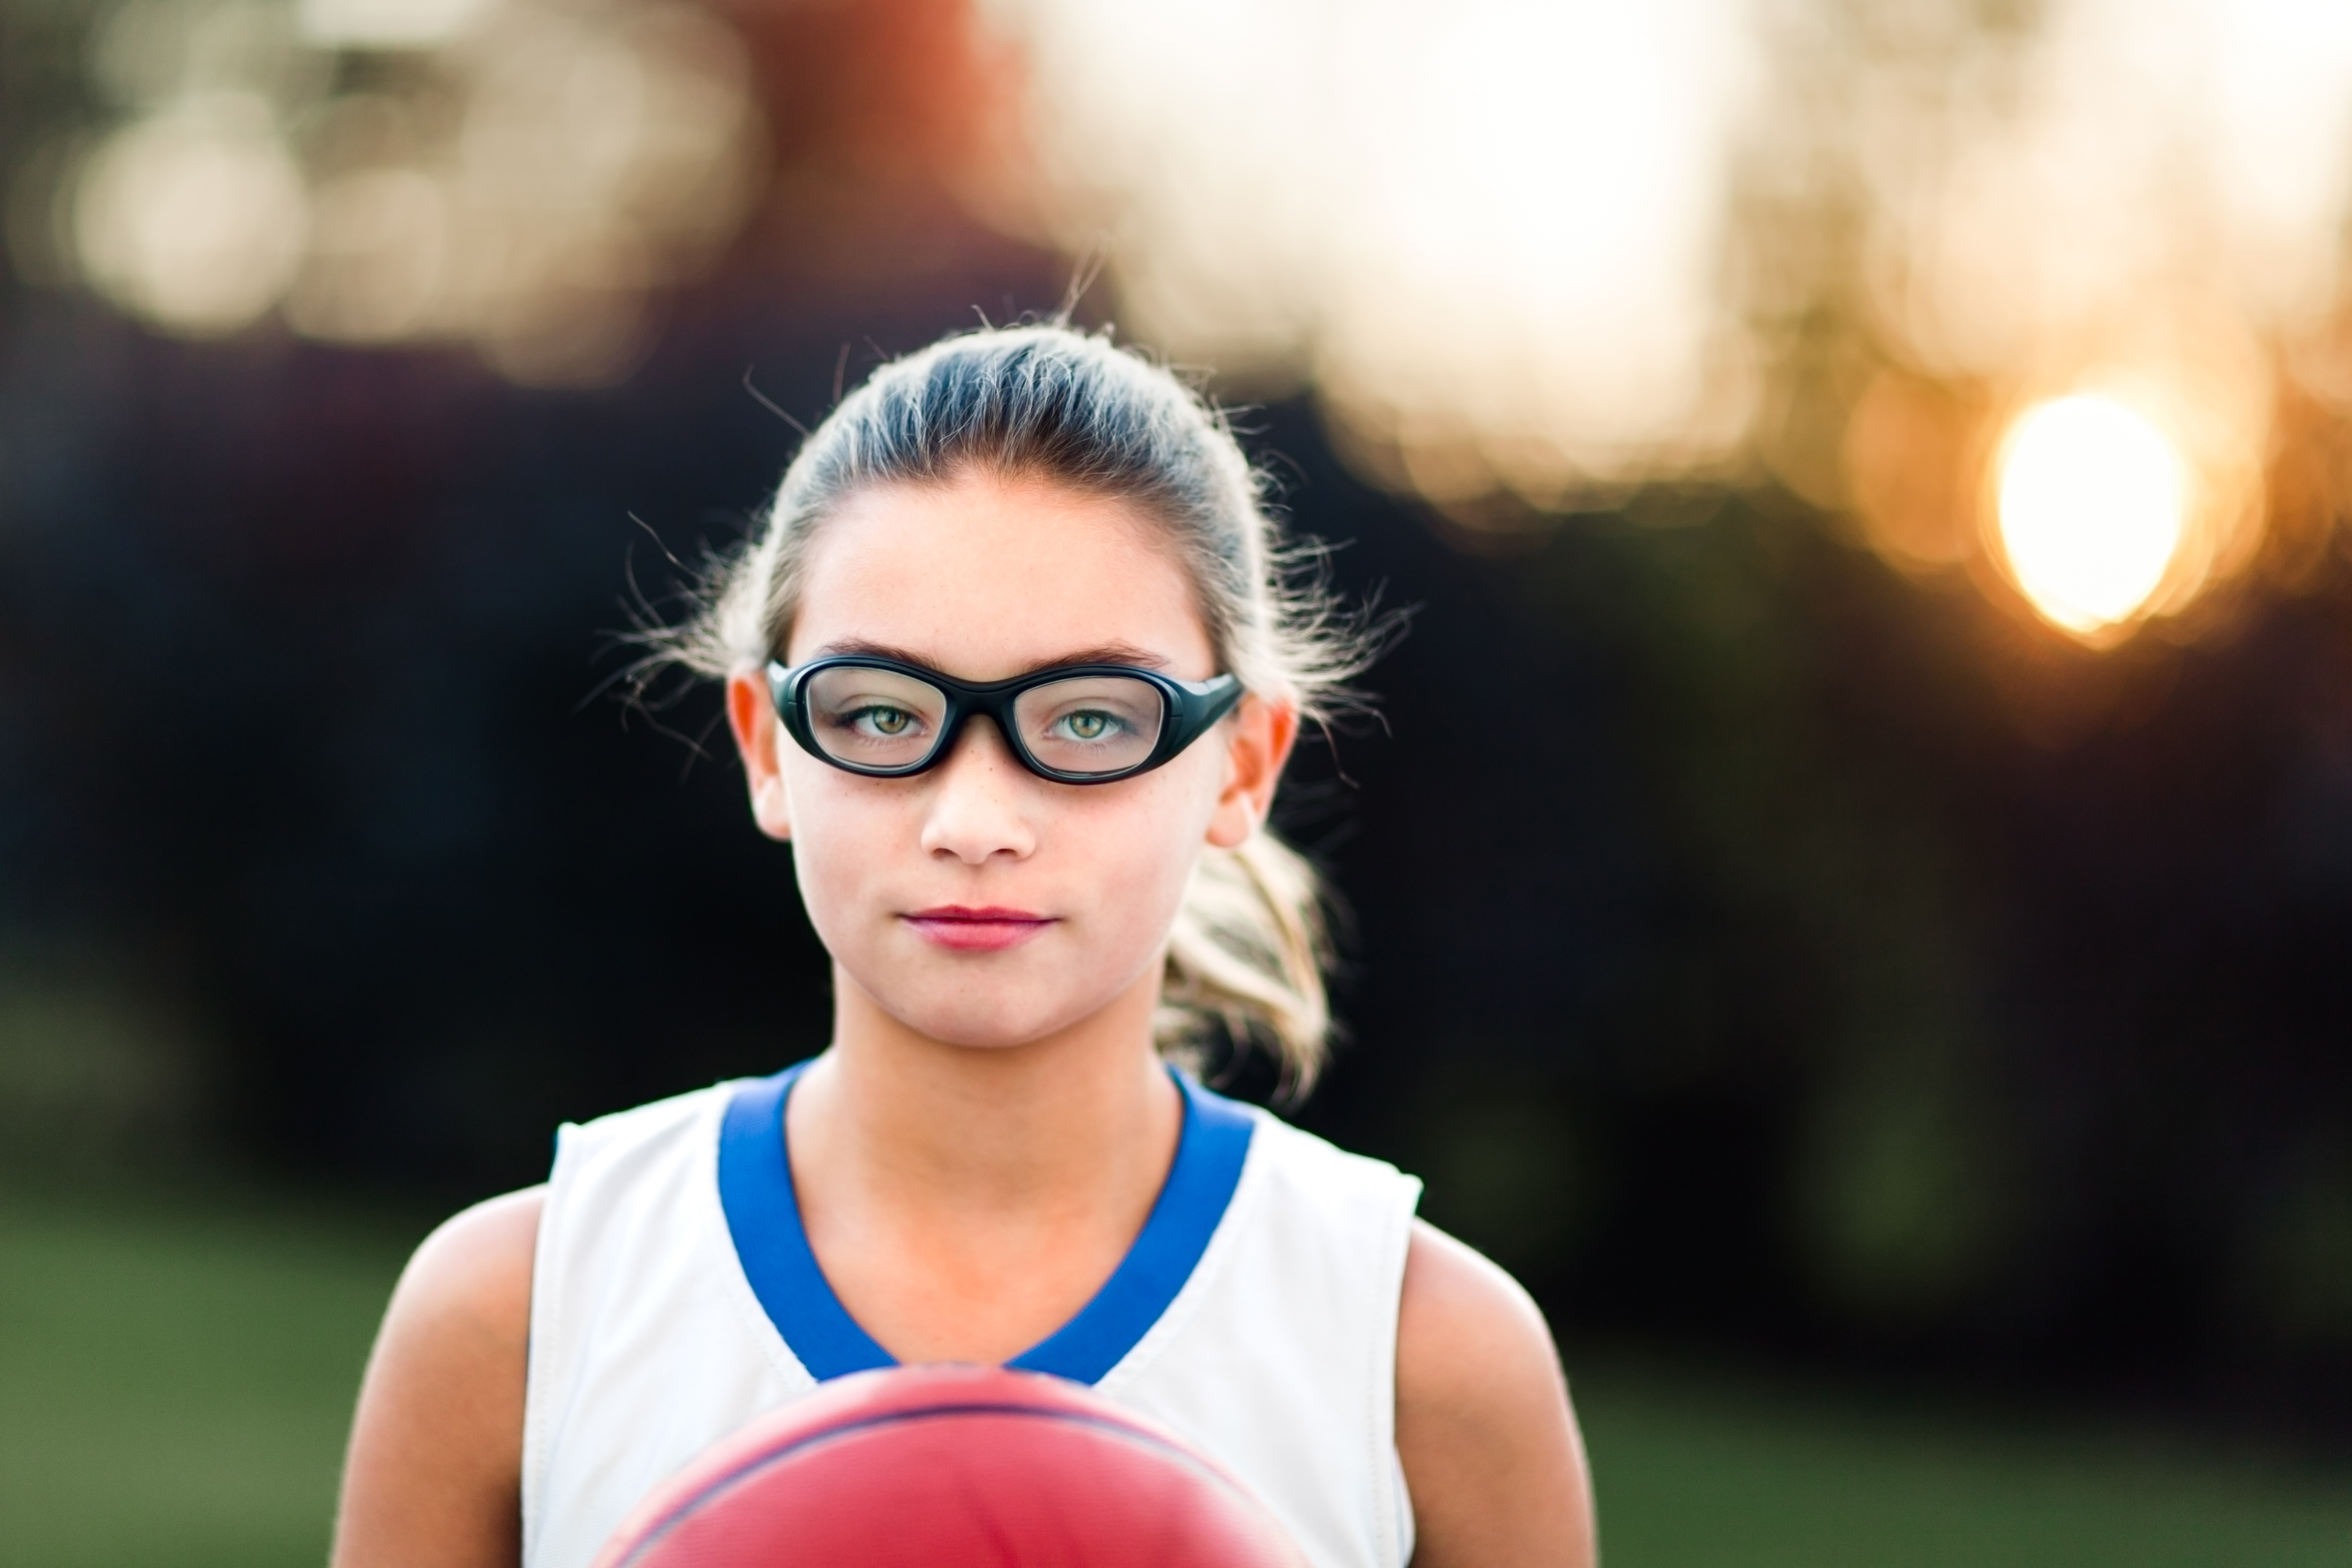 Recommending that patients use protective eyewear during sports can reduce their odds of eye injury, especially in high-risk activities such as basketball.